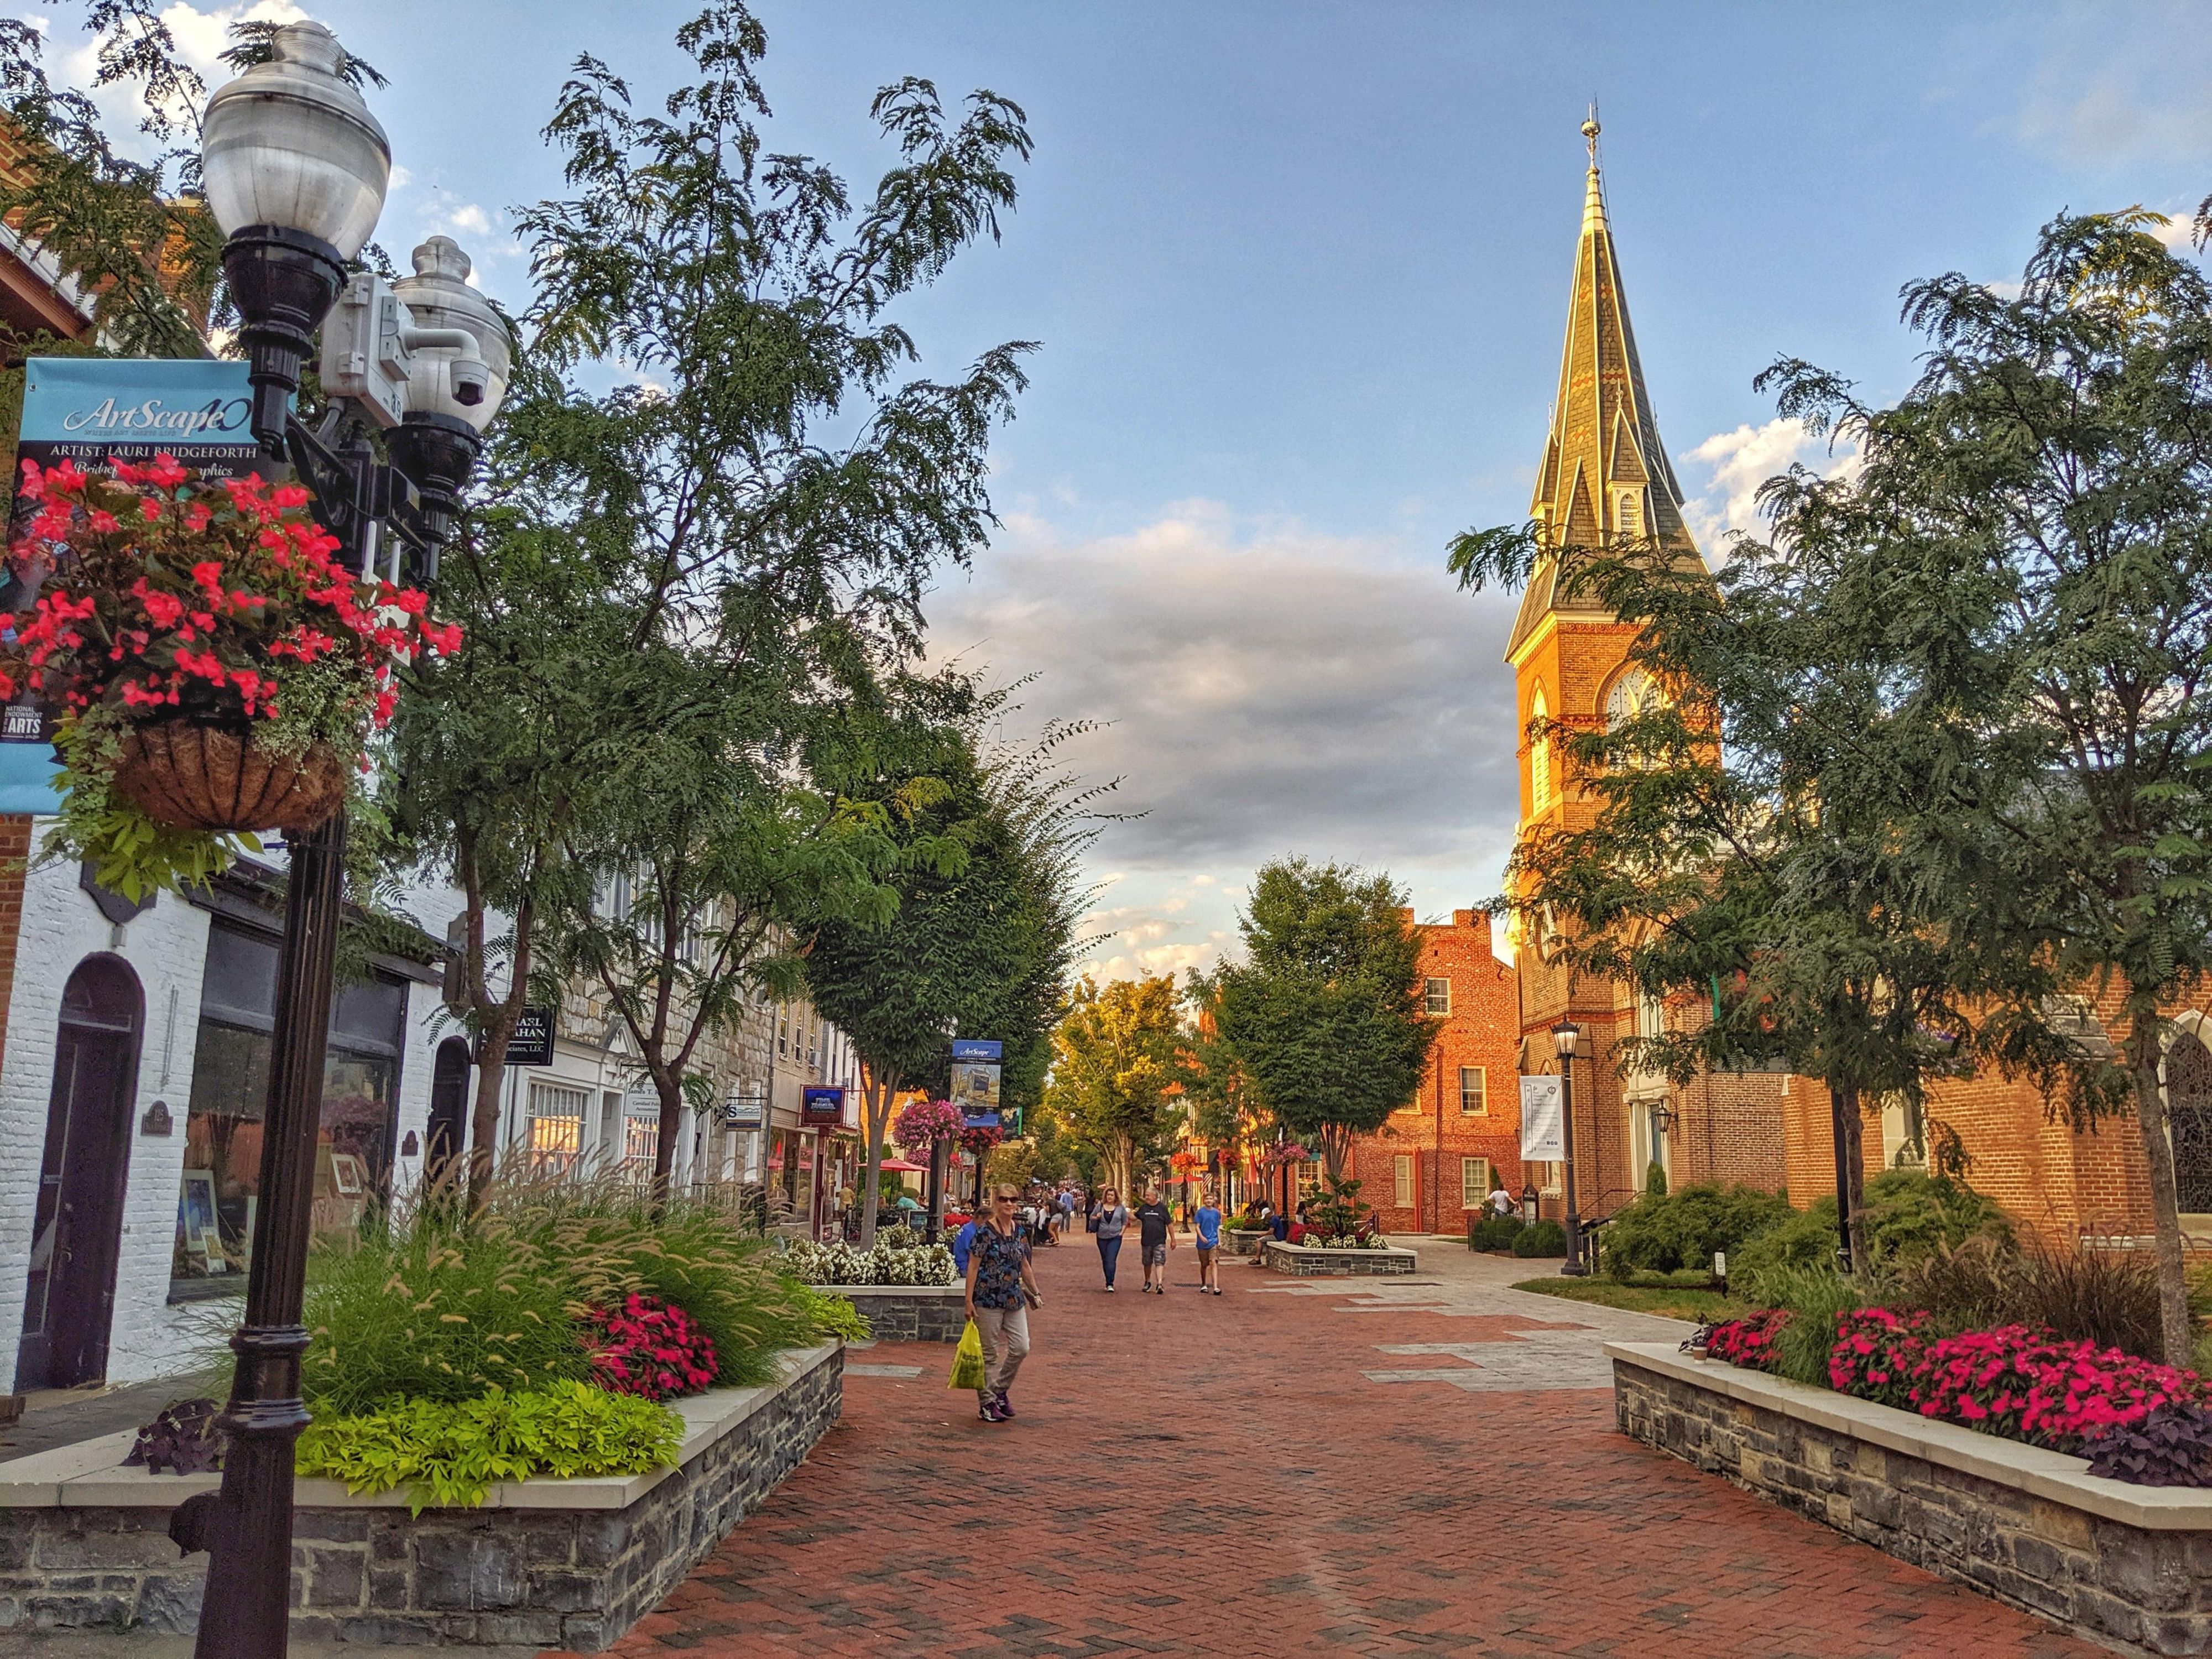 Whether you are looking for restaurants, shops or nightlife unique to Winchester, Old Town is guaranteed to give you the true Winchester experience!  Only 2 miles away!